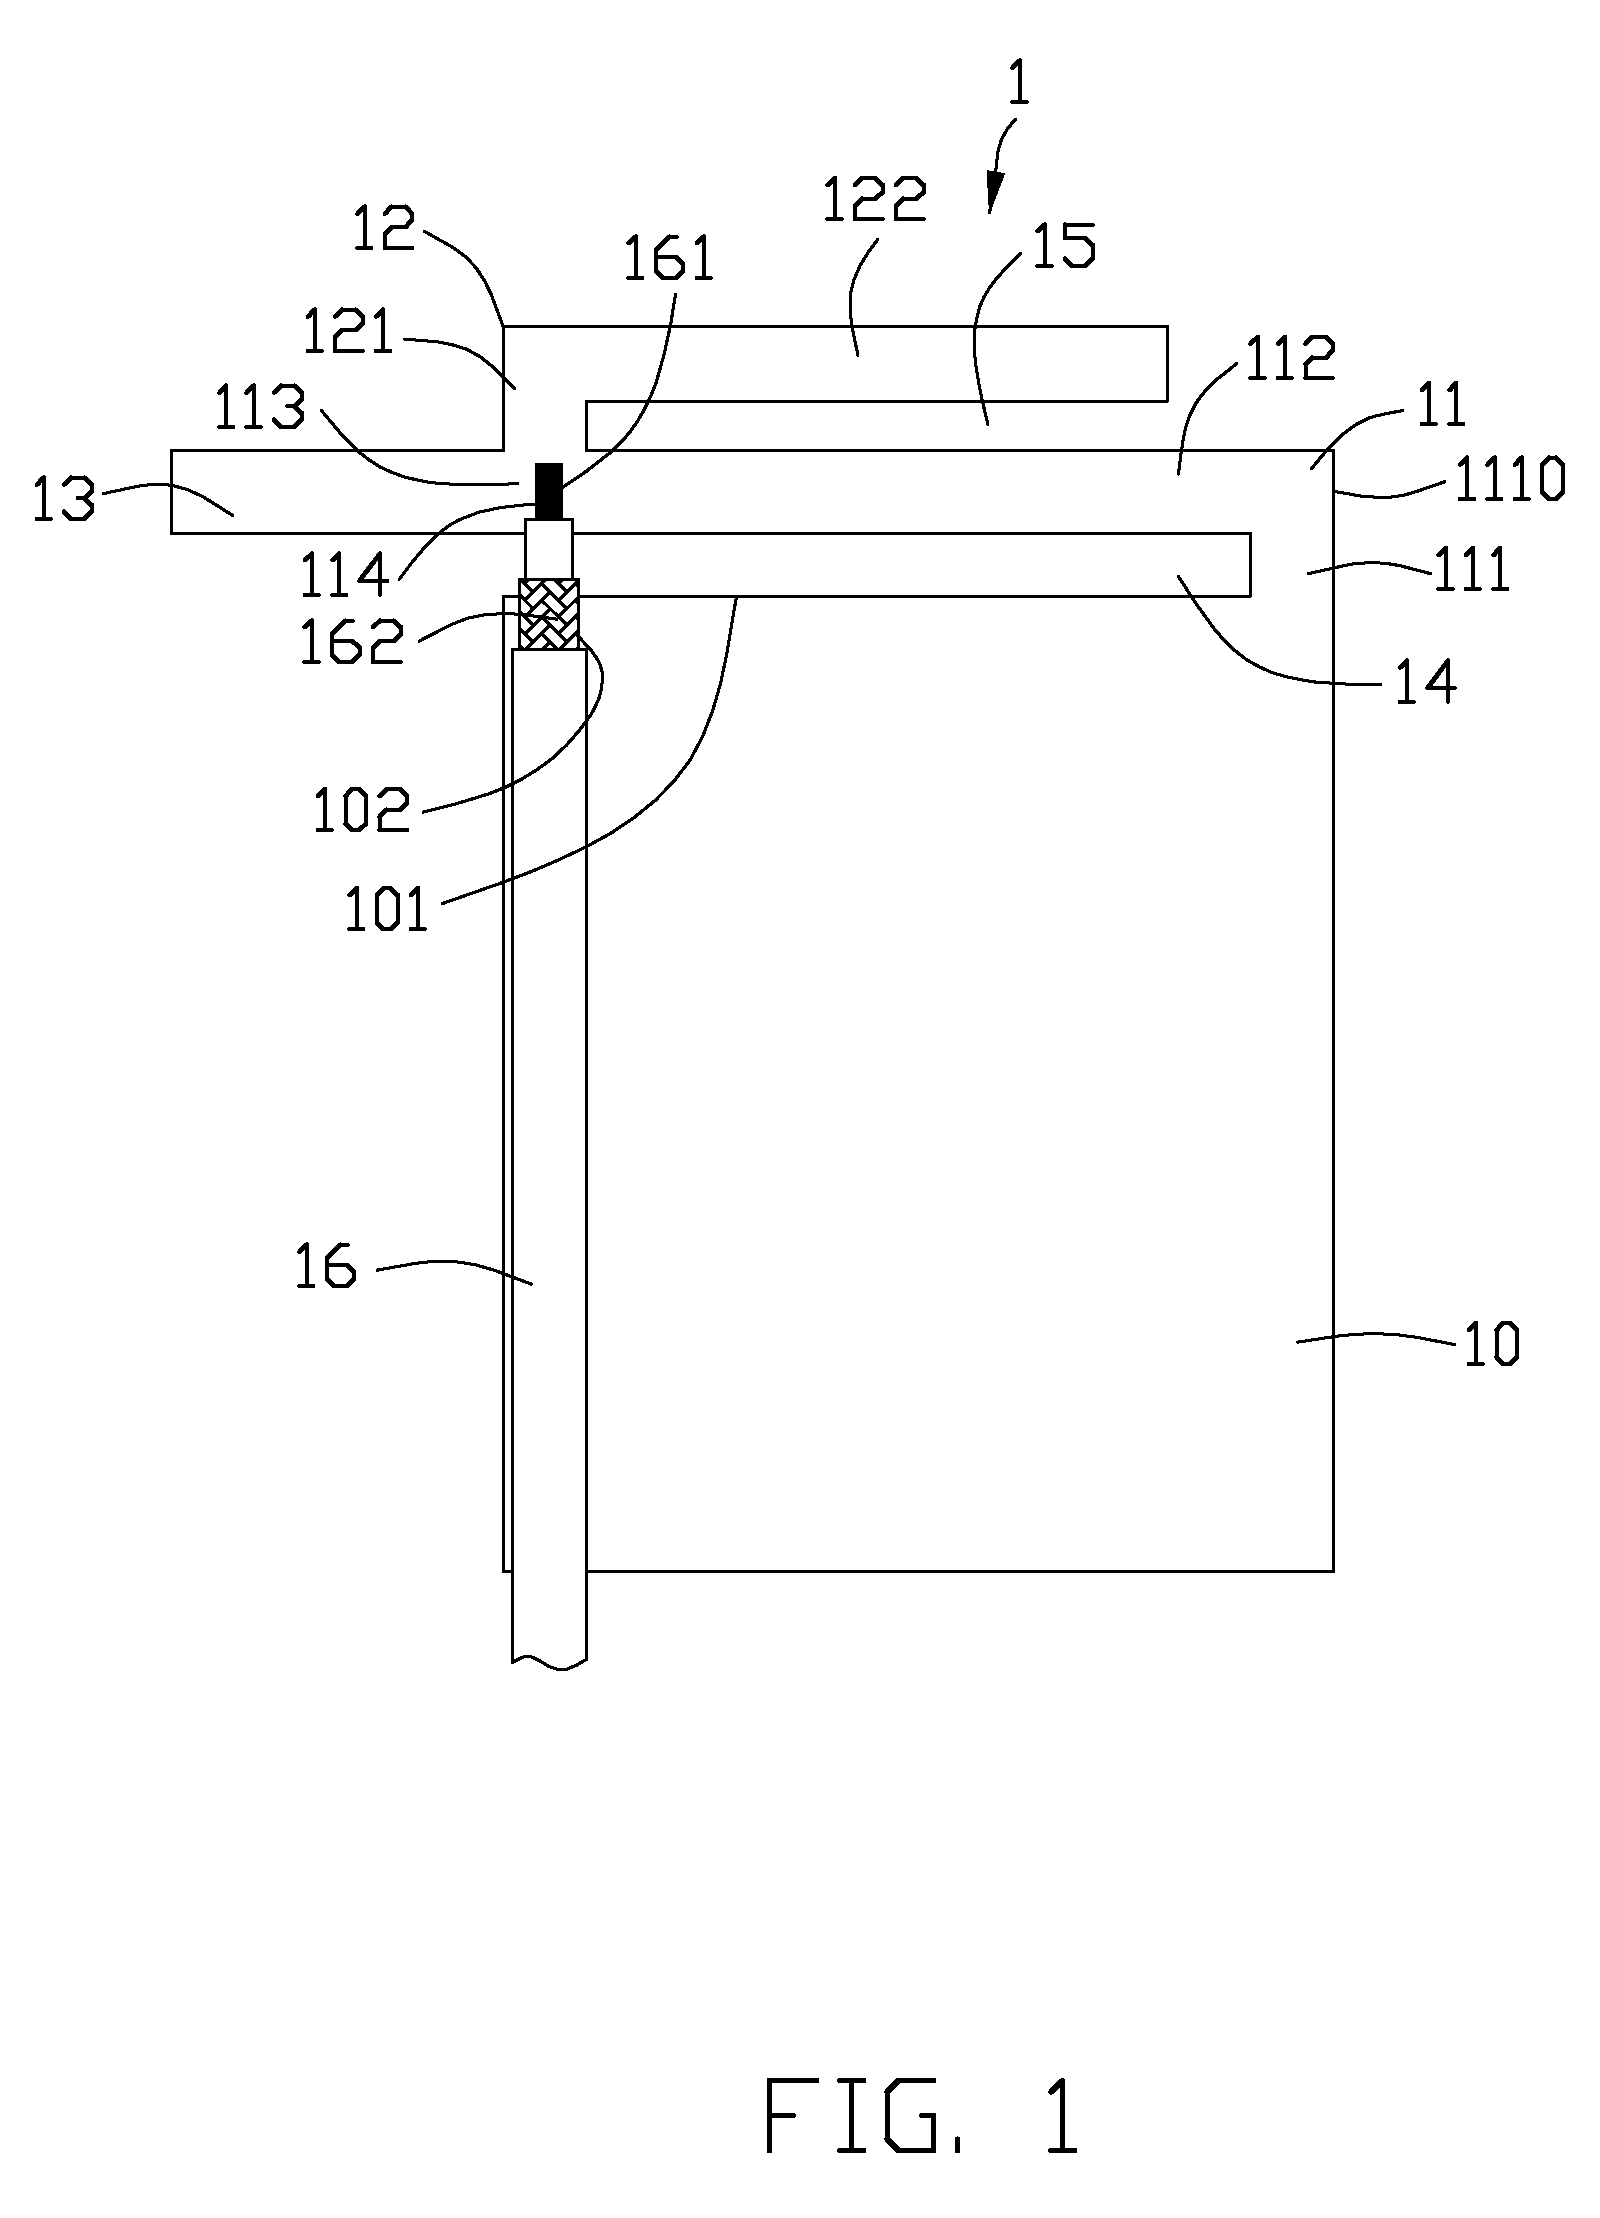 Triple-band antenna with low profile